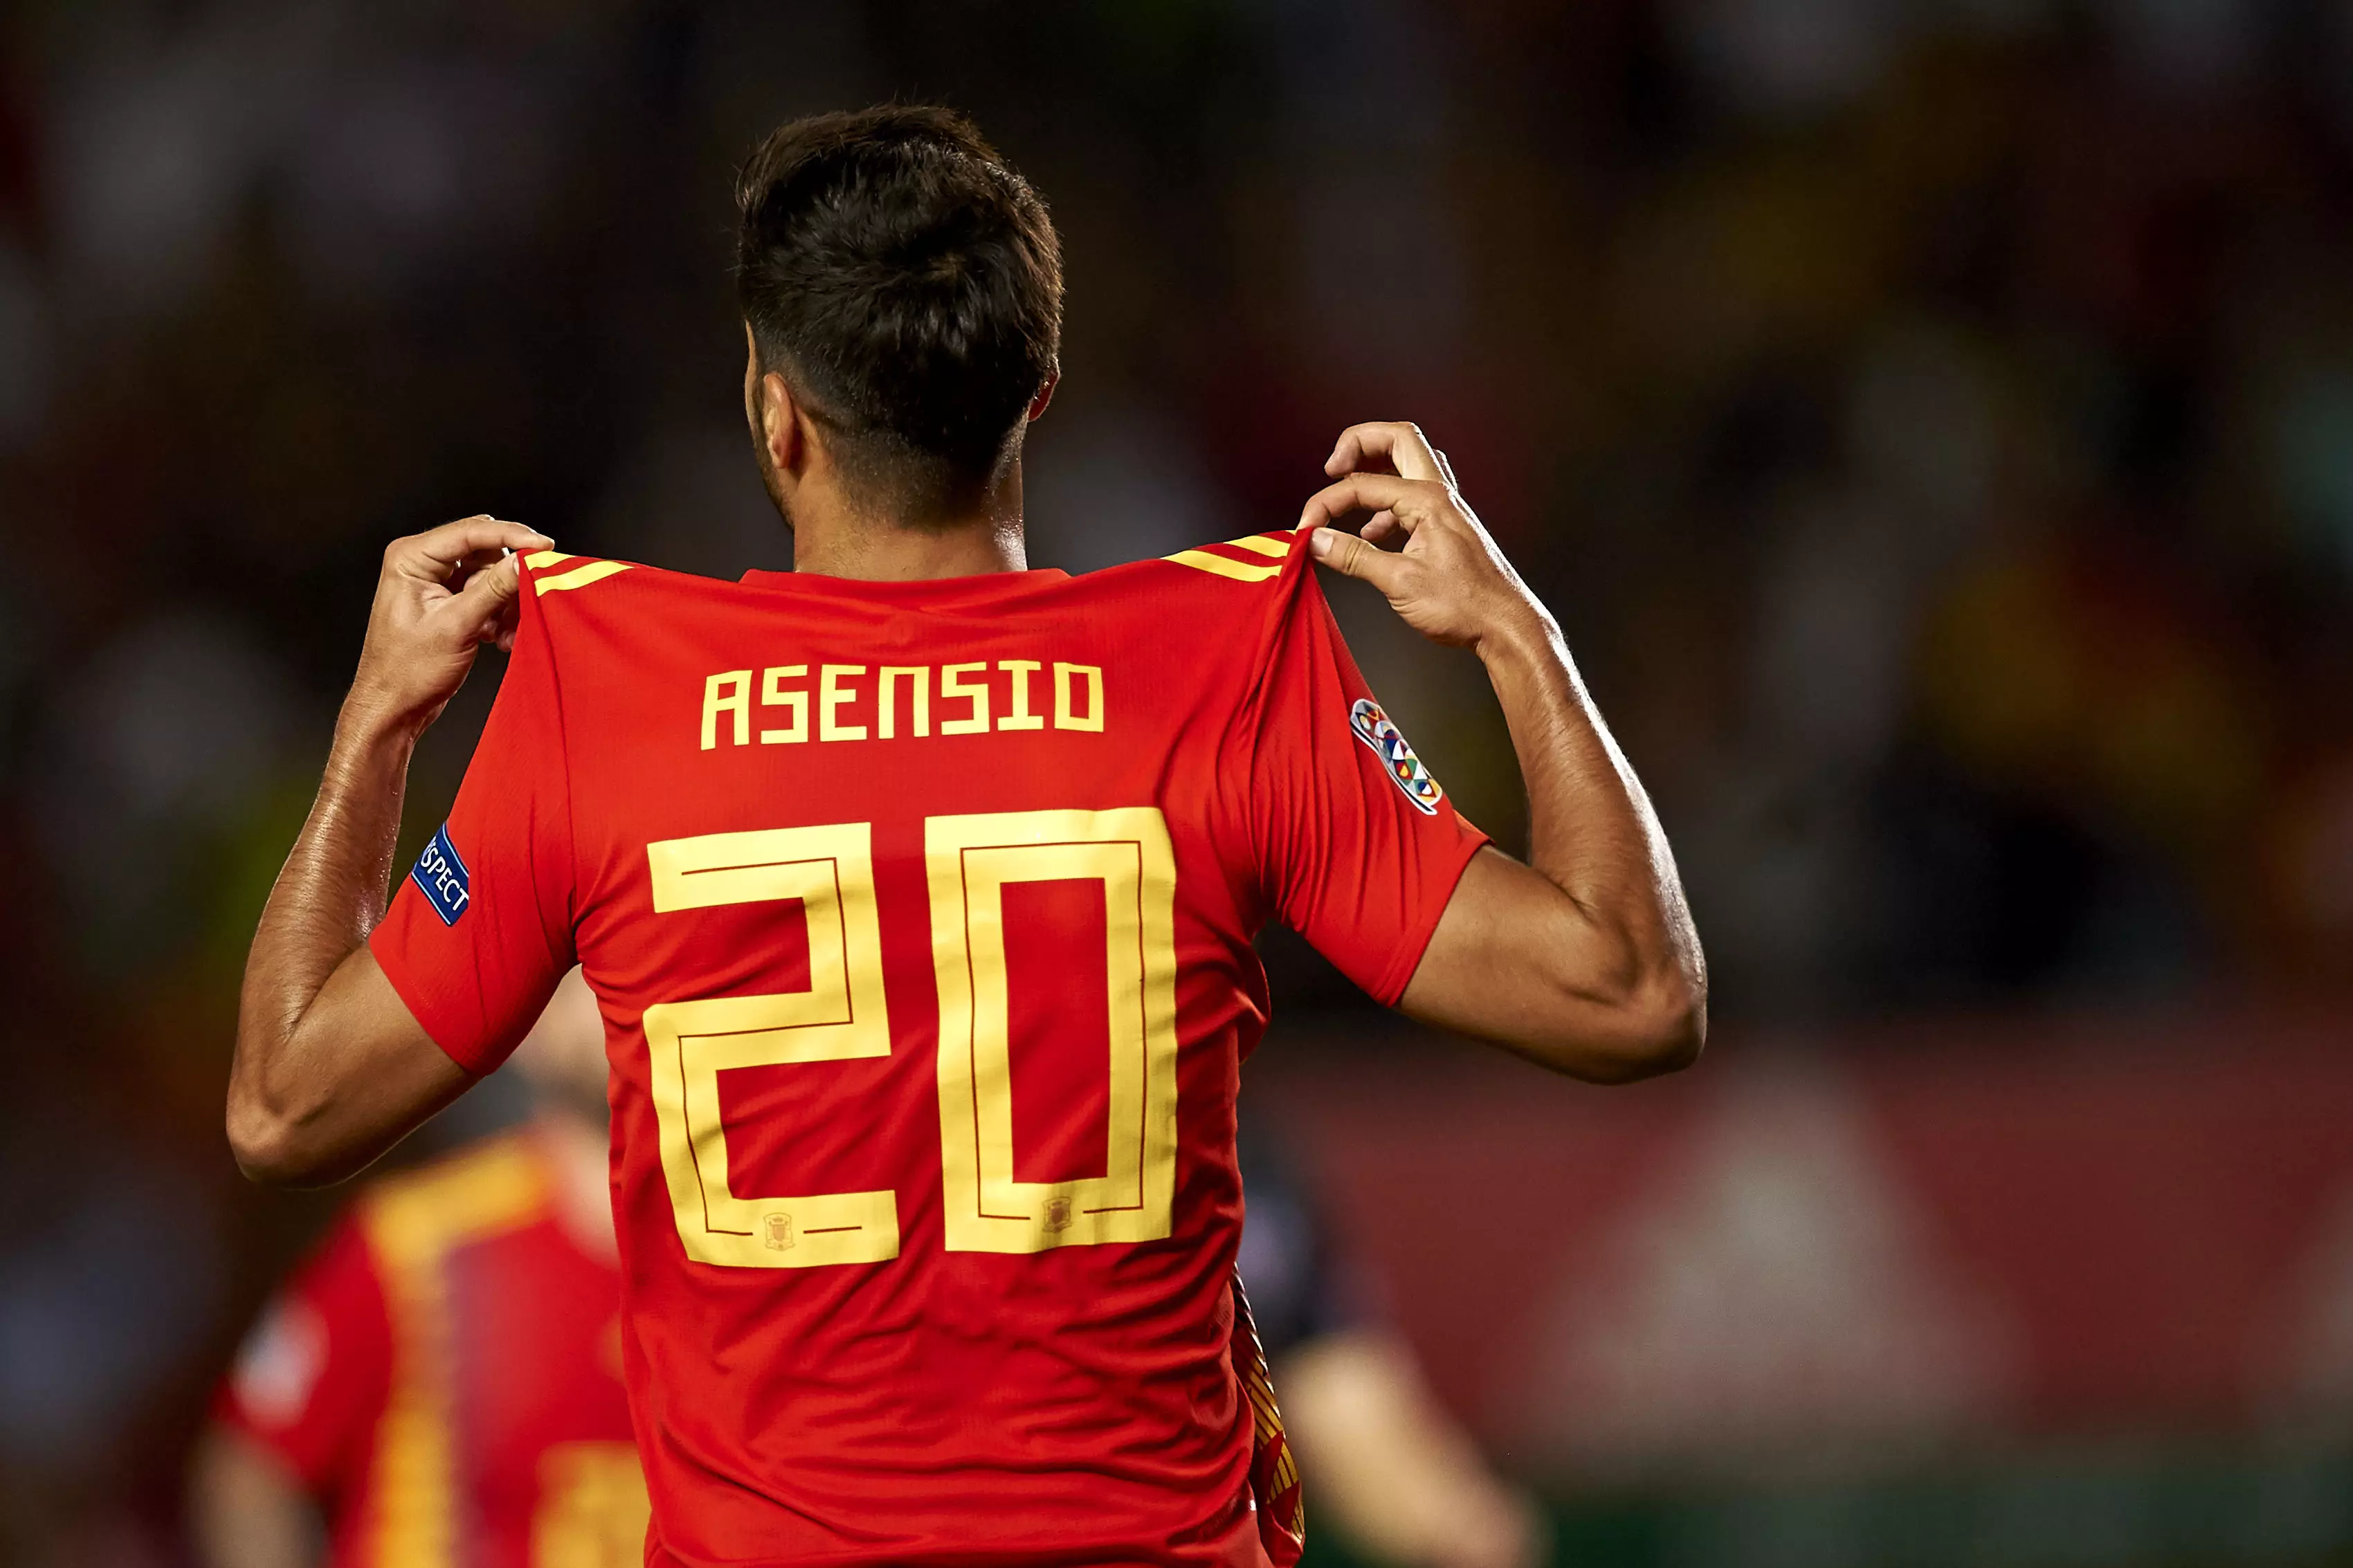 Maybe Asensio should be in the number 10 or number 7 jersey for club and country. Image: PA Images